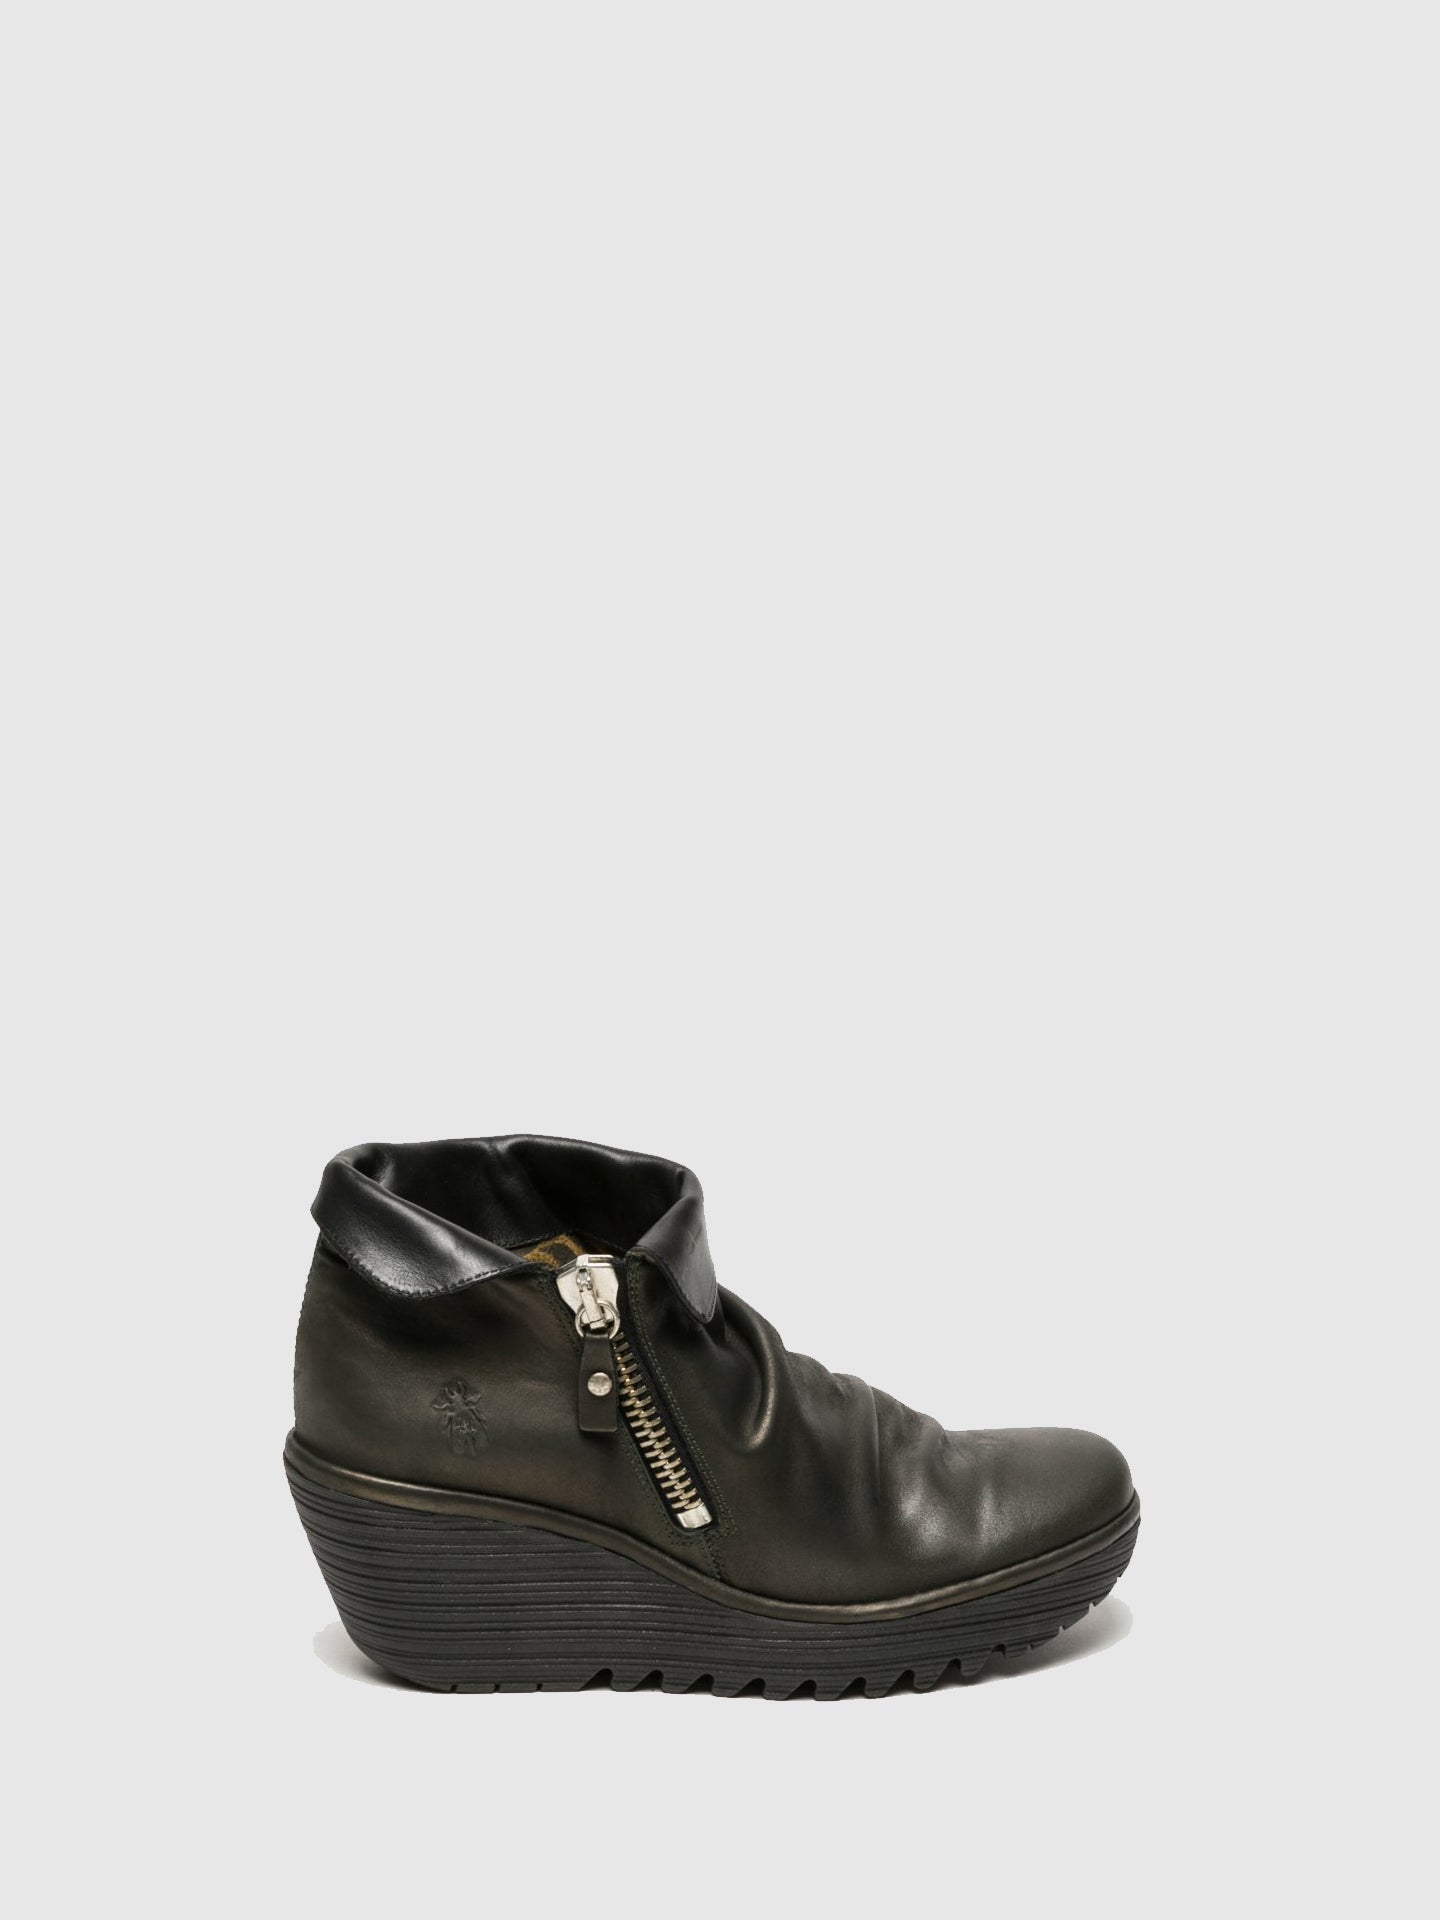 Fly London Coal Black Zip Up Ankle Boots